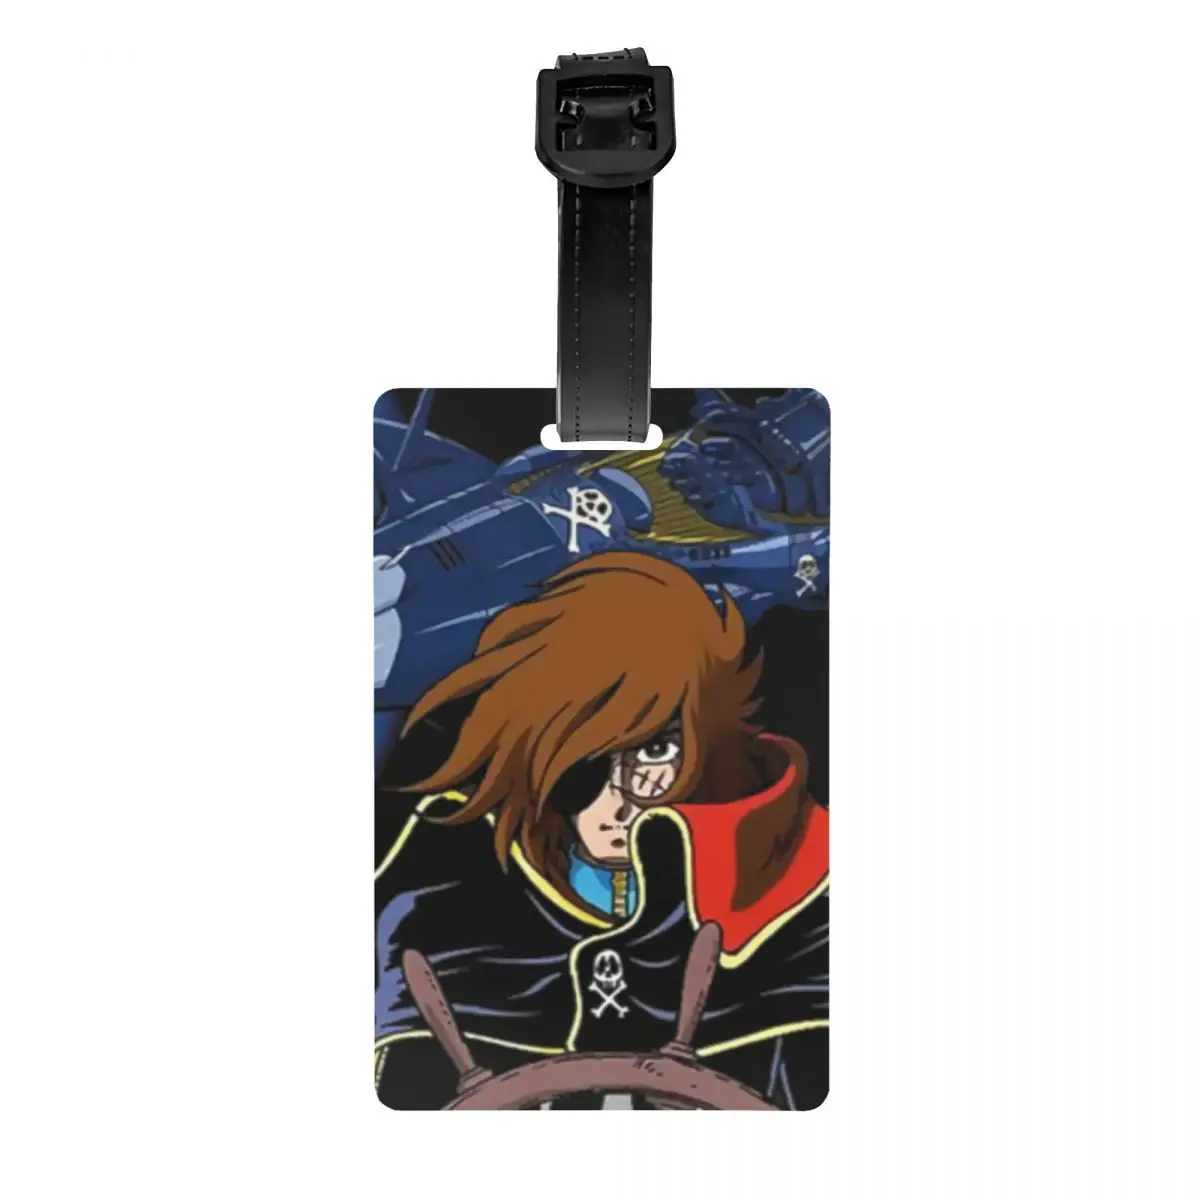 

Custom Anime Space Pirate Captain Harlock Luggage Tag With Name Card Privacy Cover ID Label for Travel Bag Suitcase